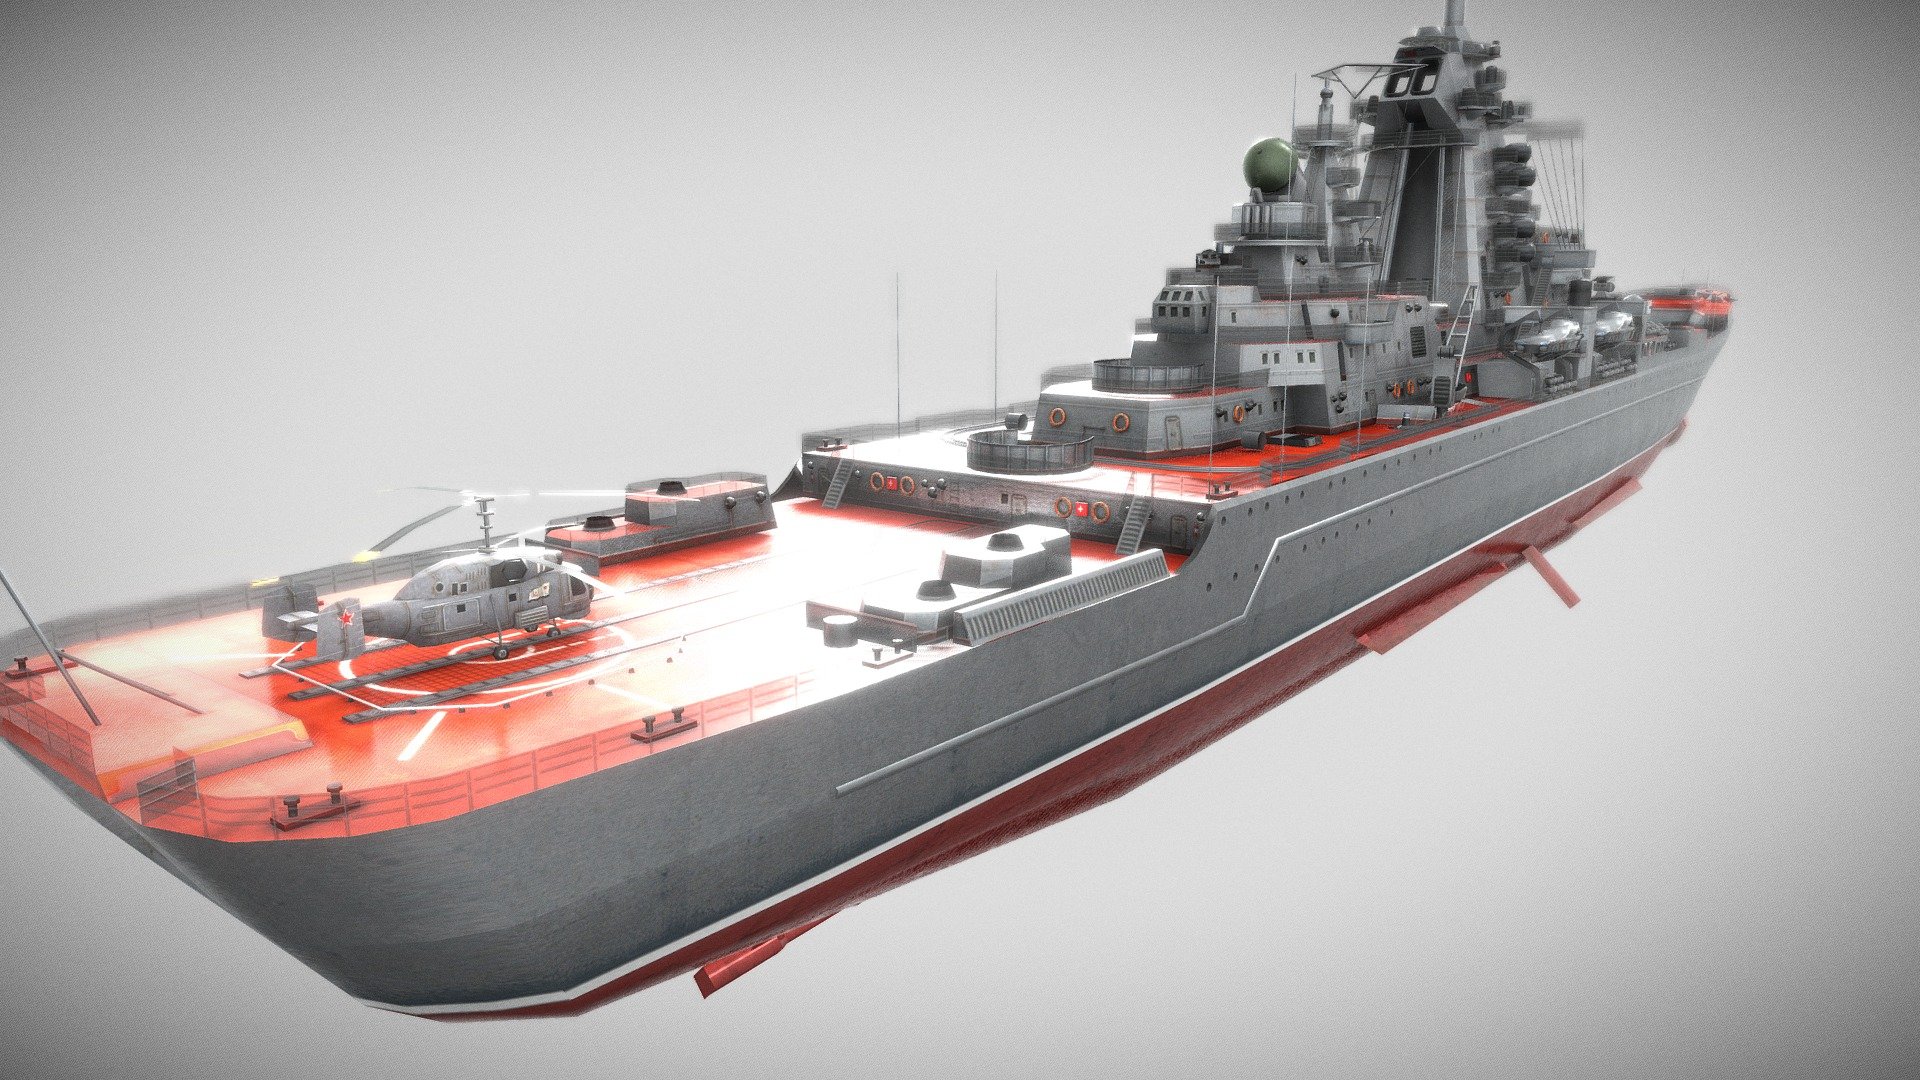 The Kirov-class battlecruiser is a type of warship that was built by the Soviet Union/Russia. She has a displacement of 24,300 tons (standard) and 28,000 tons (full load), and measures 252 meters (827 feet) in length and 28.5 meters (94 feet) in beam 3d model